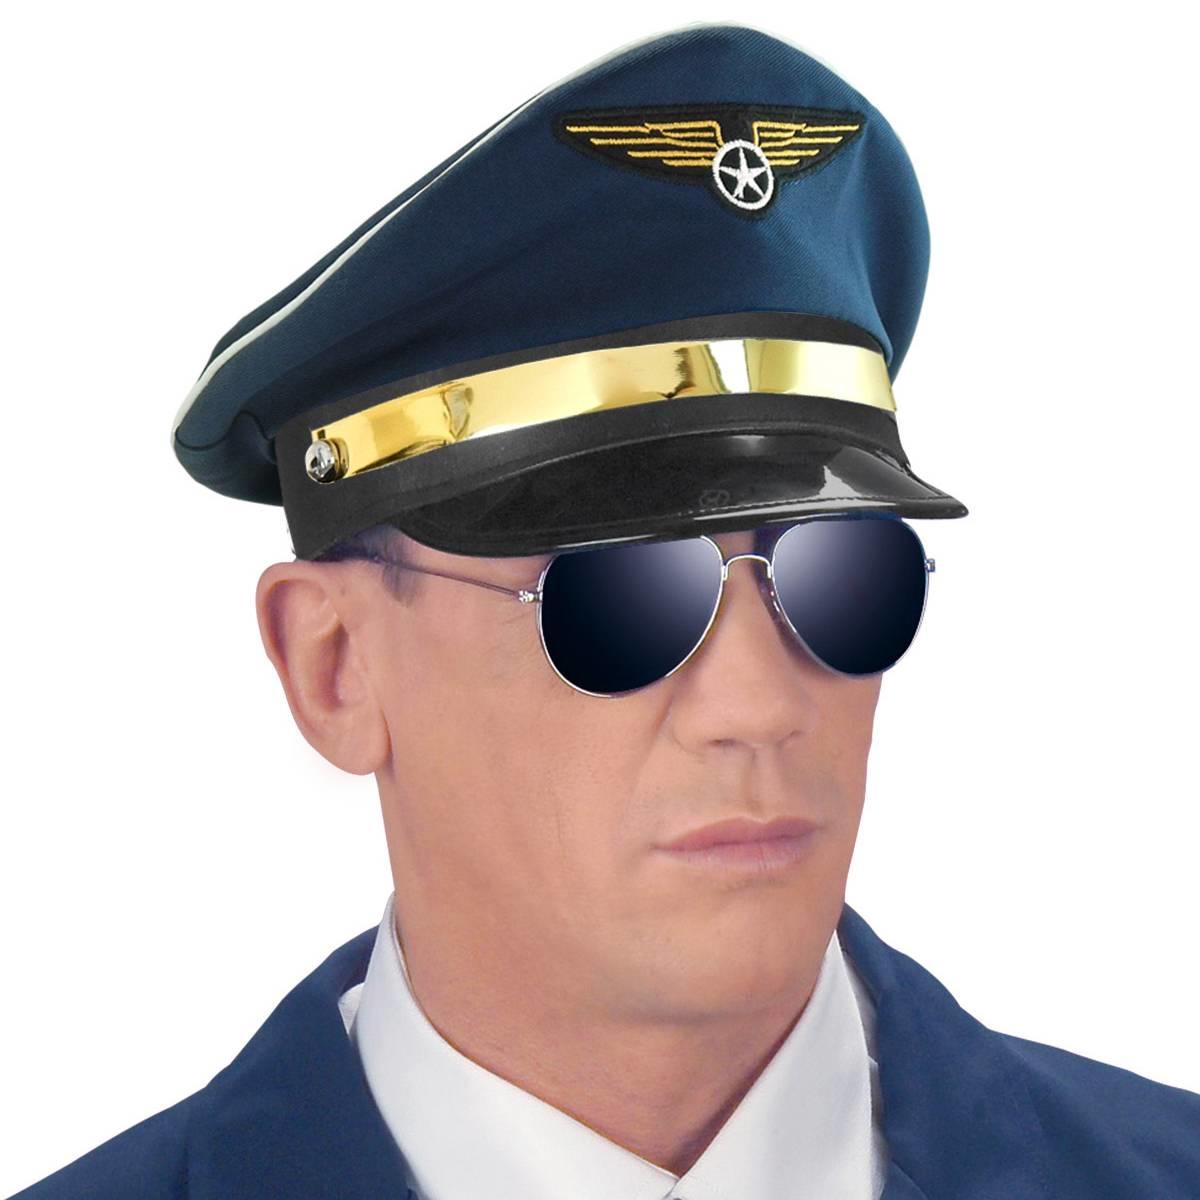 Airline Pilot Hat by Widmann 3326P available here at Karnival Costumes online party shop